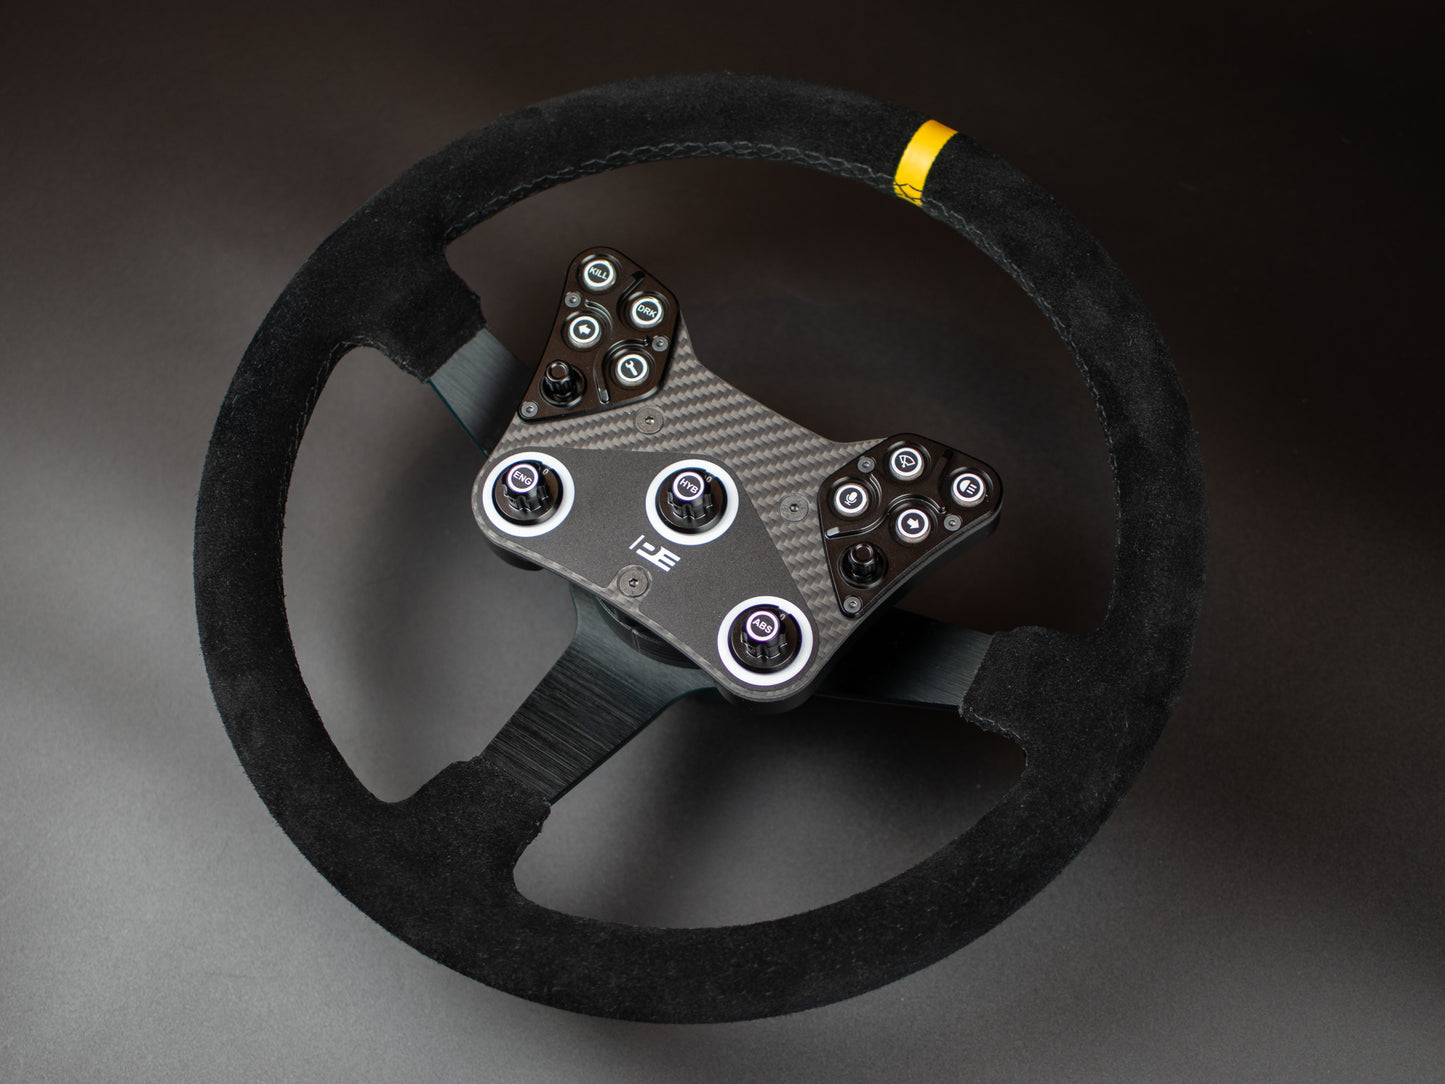 RALLY button box on round wheel for simulator racing